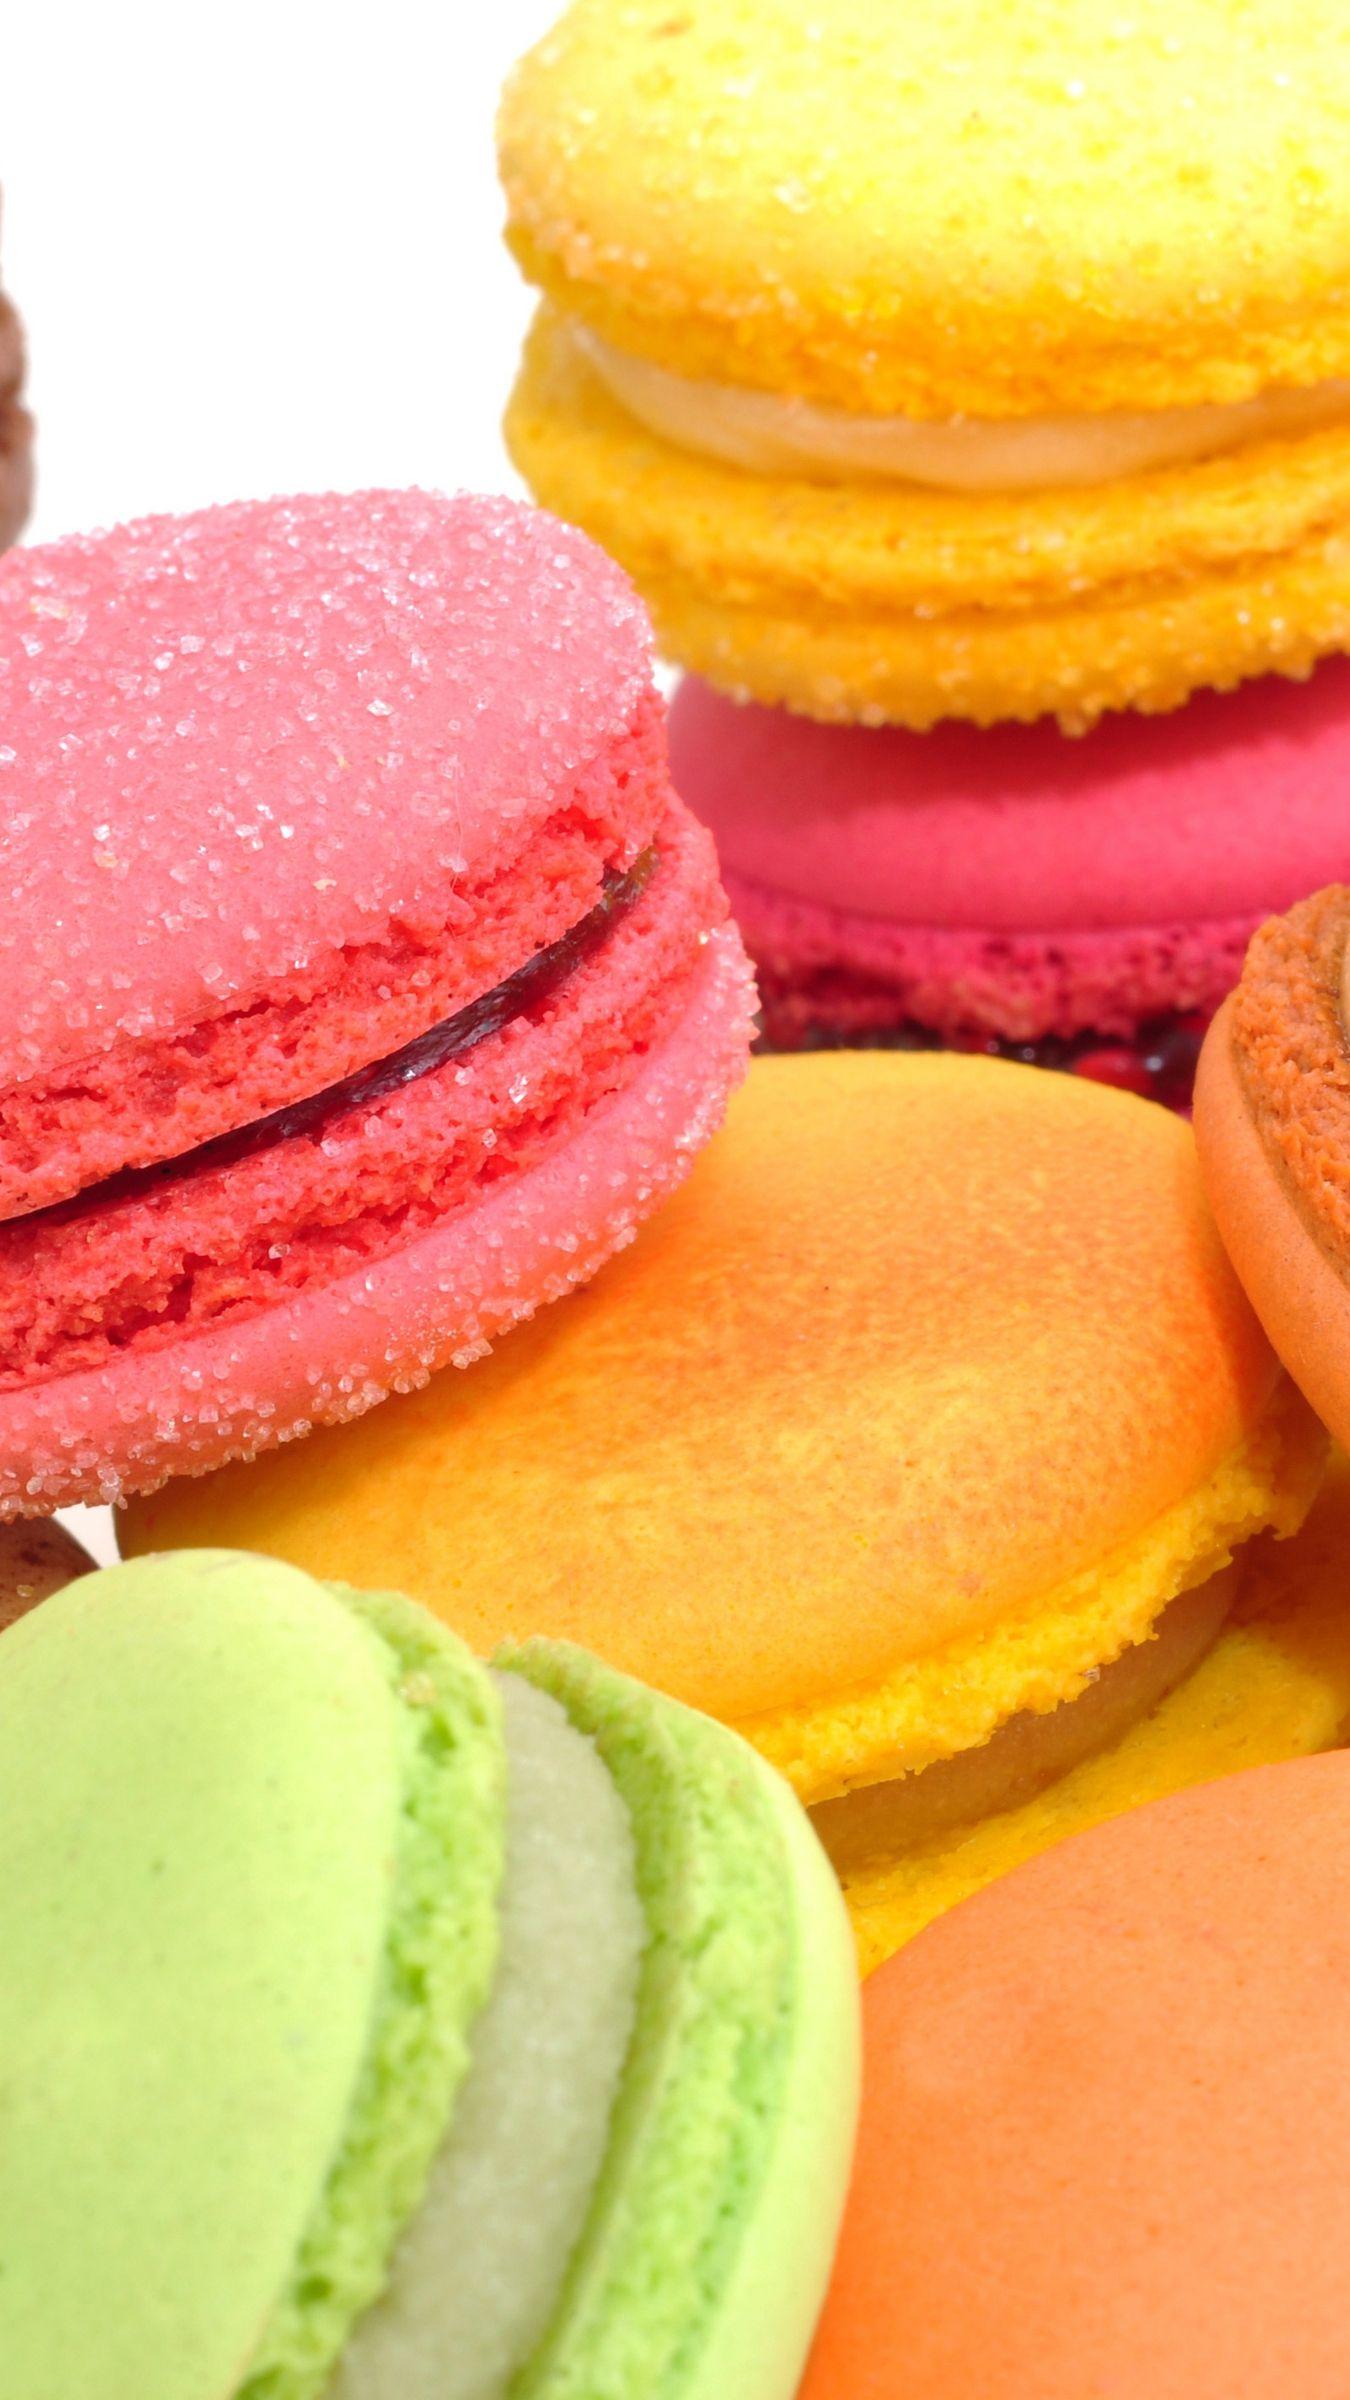 Download wallpaper 1350x2400 macaron, french confection, dessert